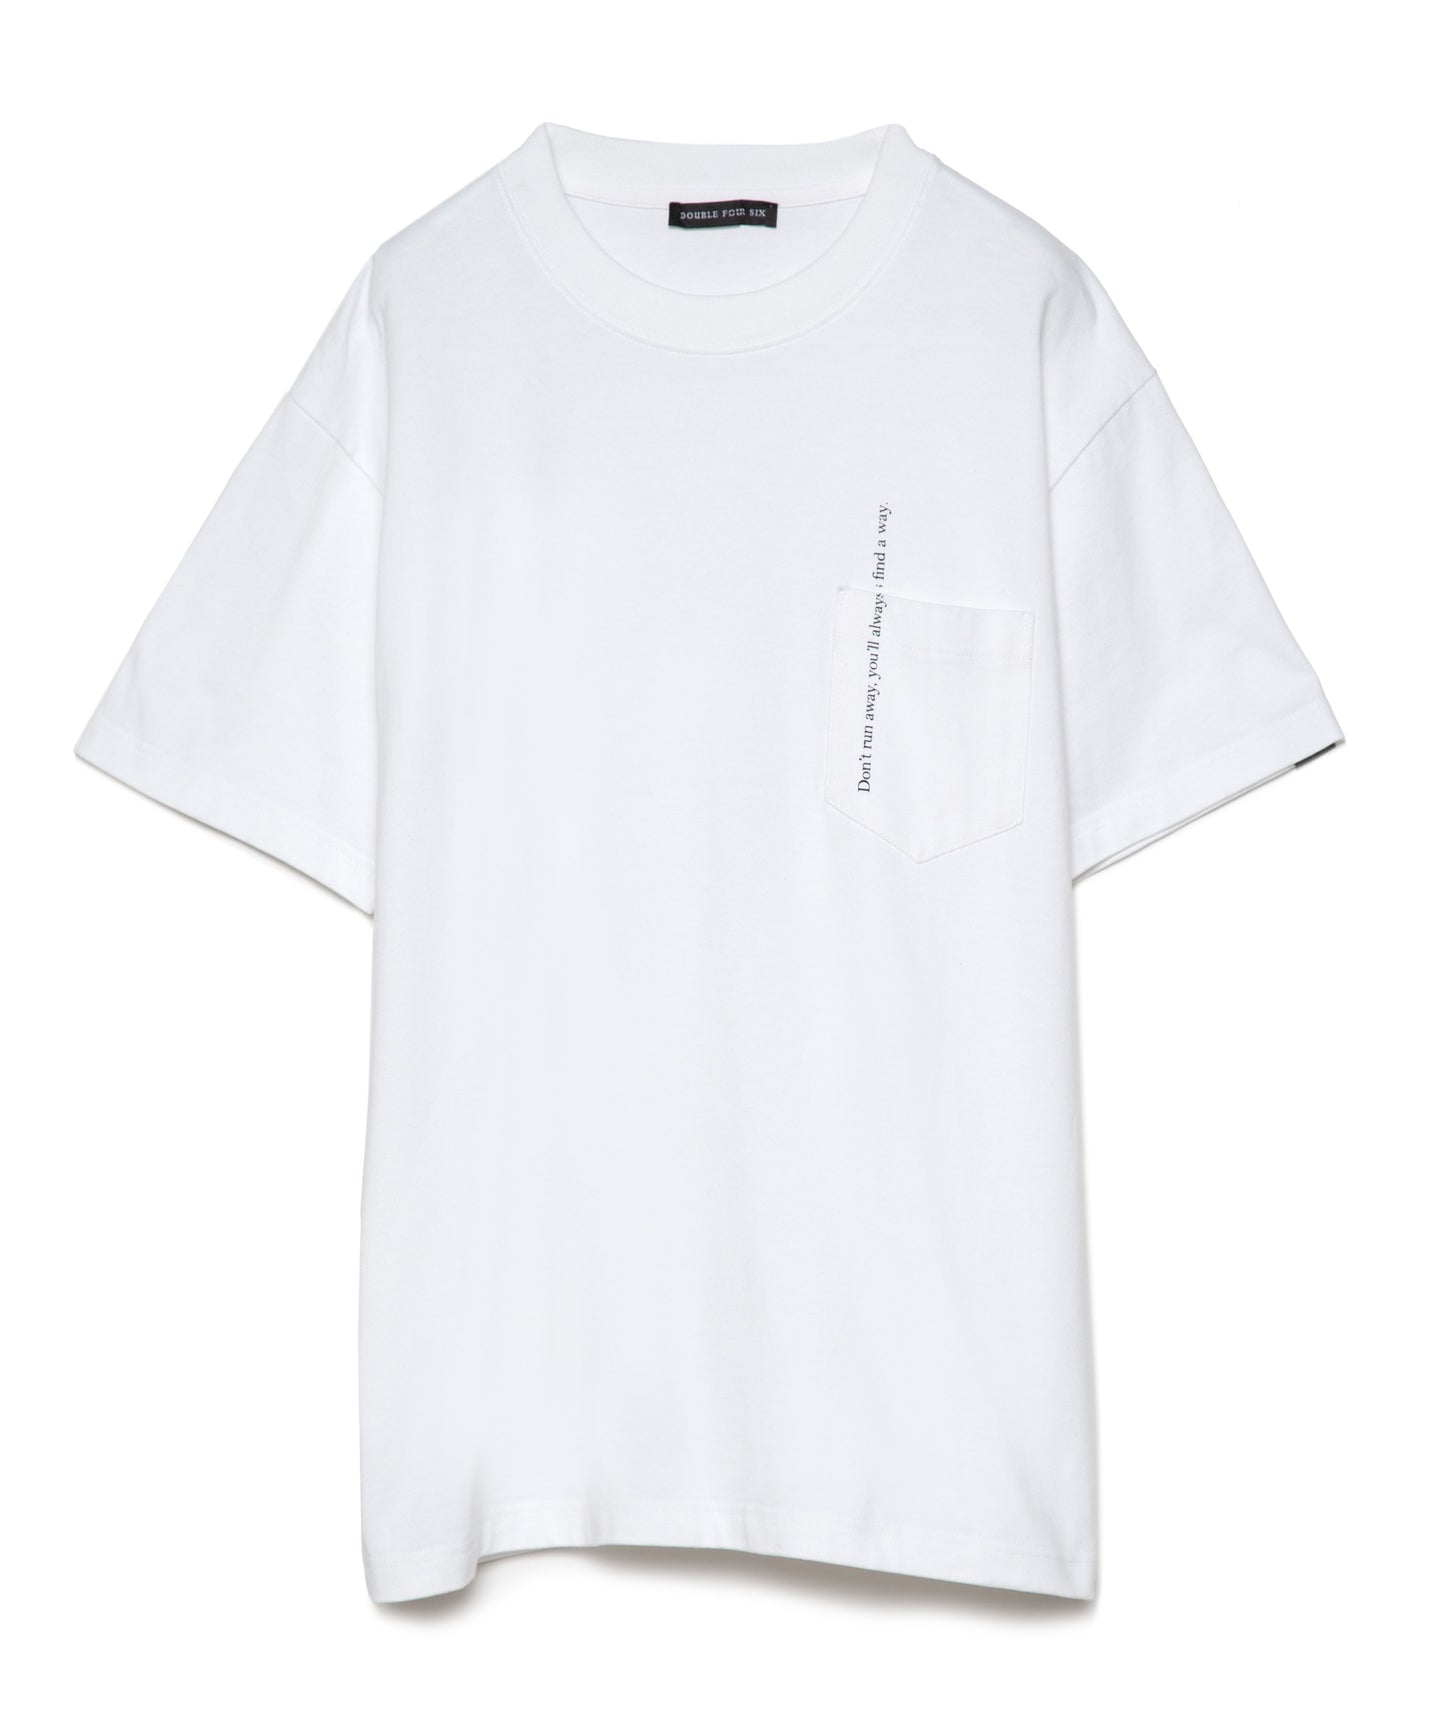 Message Print With Pocket T-shirt	White